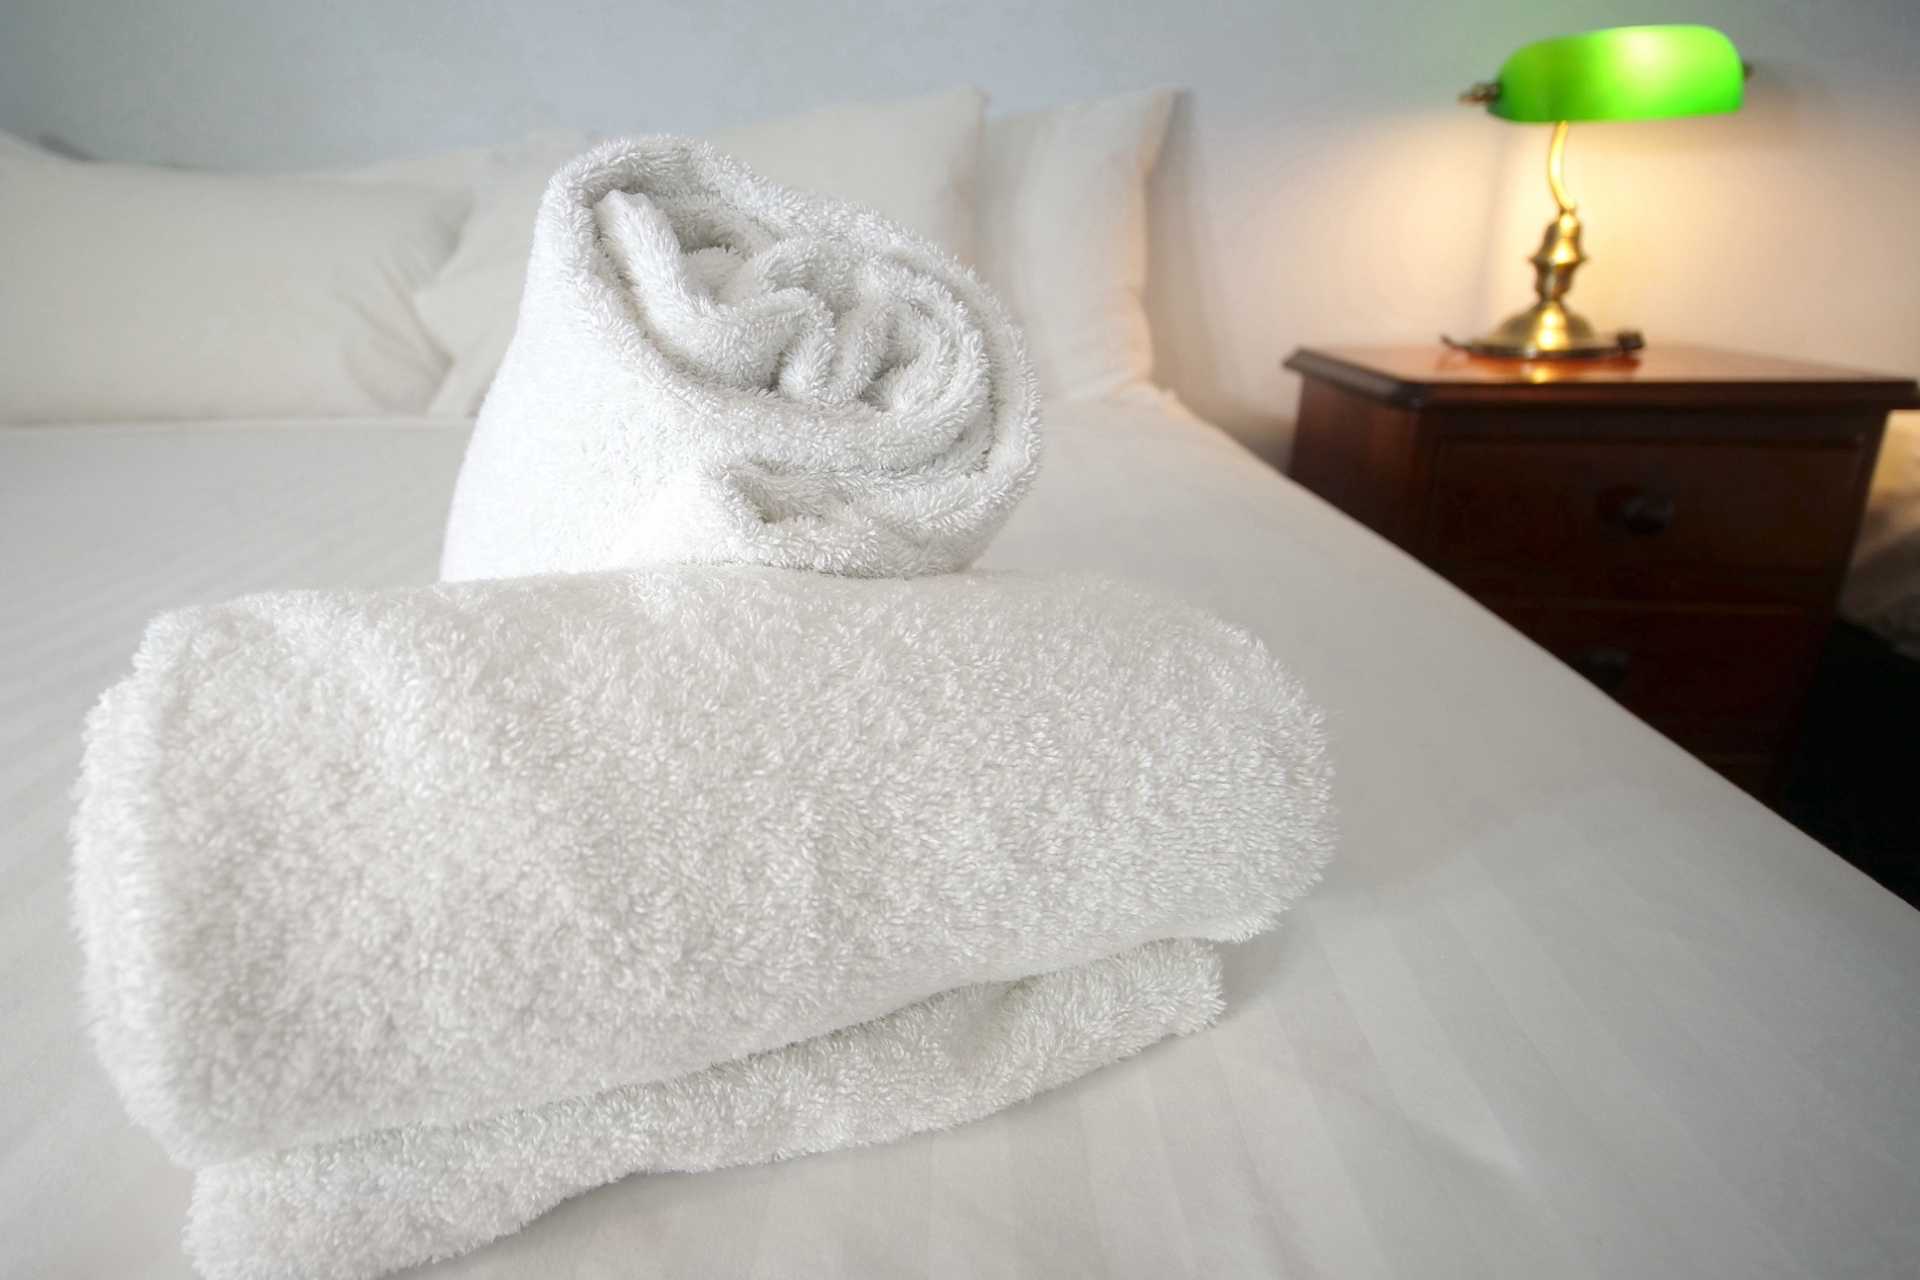 Neatly rolled white towels on a pristine hotel bed with a classic green-shaded bedside lamp in the background, indicative of the meticulous attention to detail that enhances a guest's journey and overall experience in a hotel.